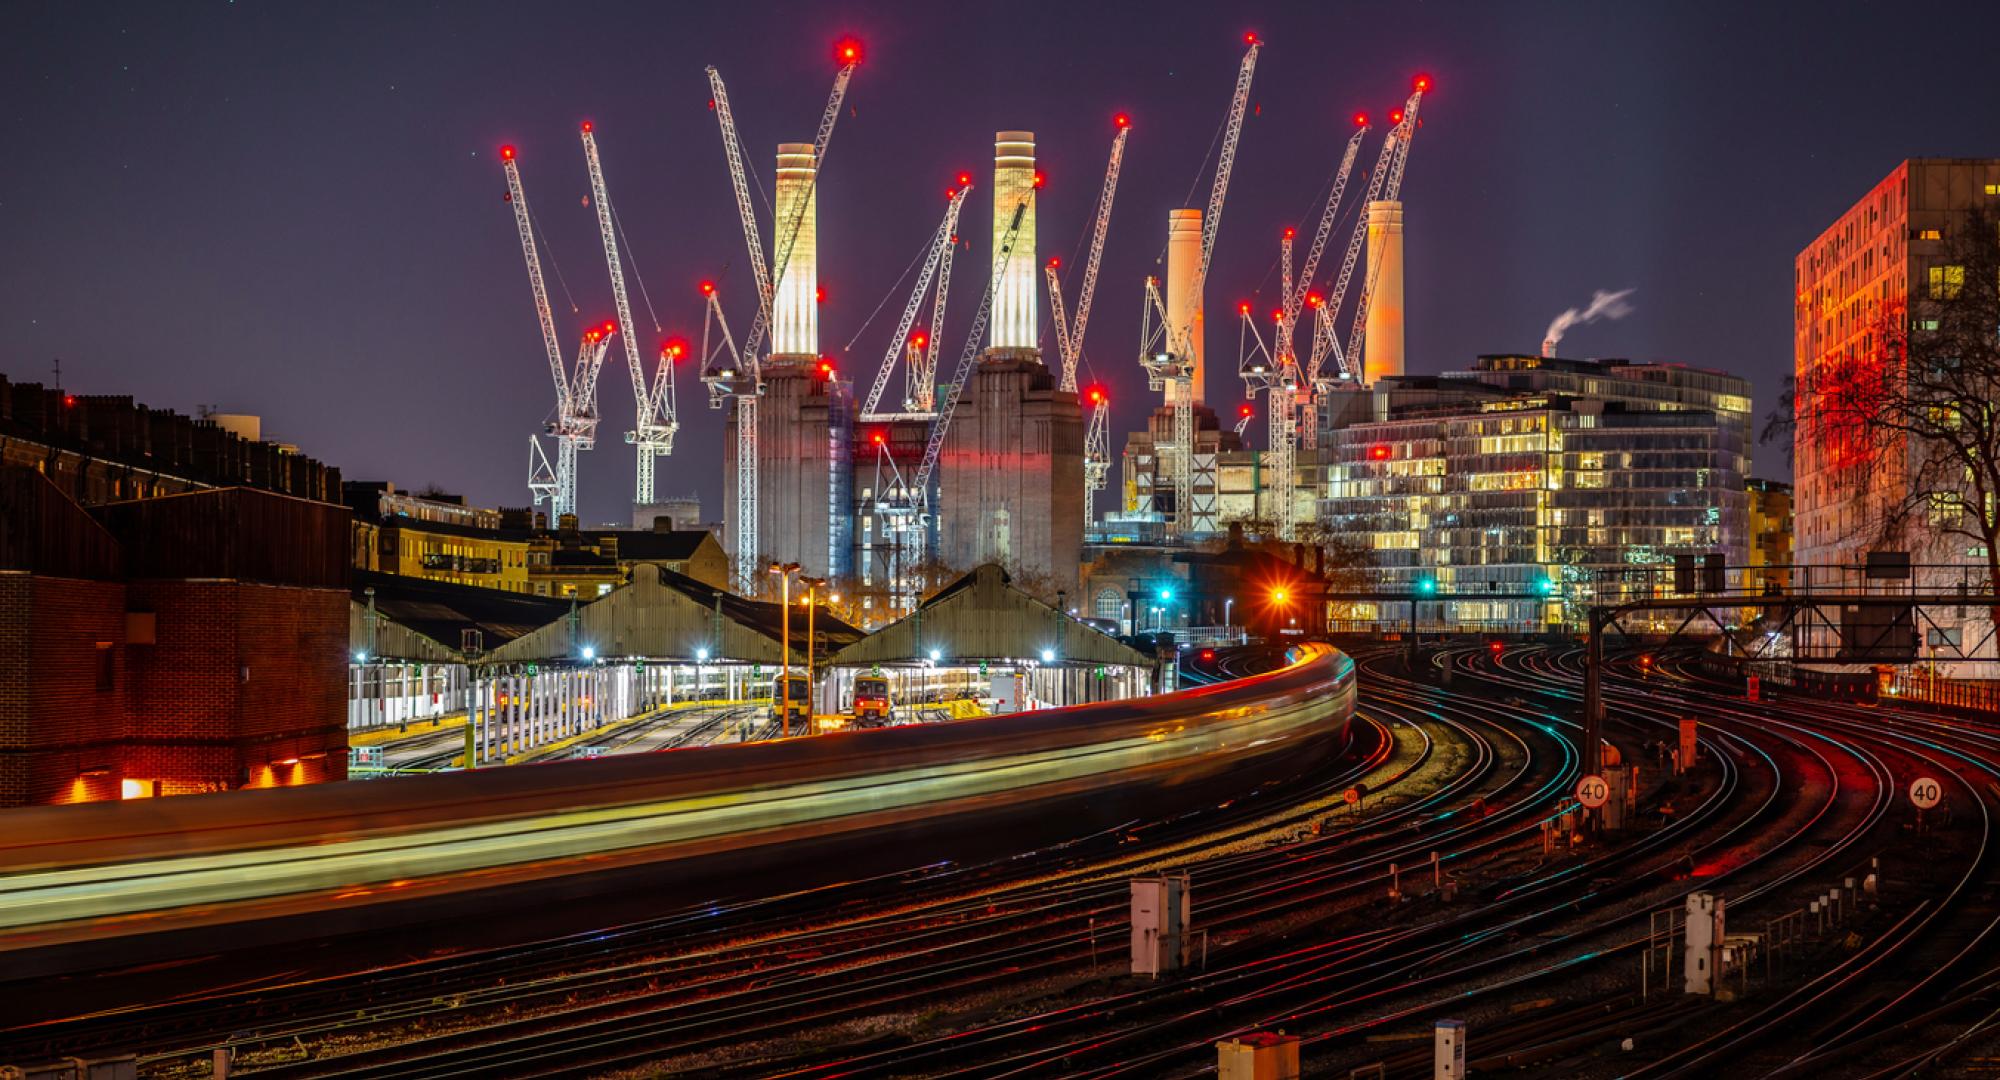 Battersea power station and rail links at night